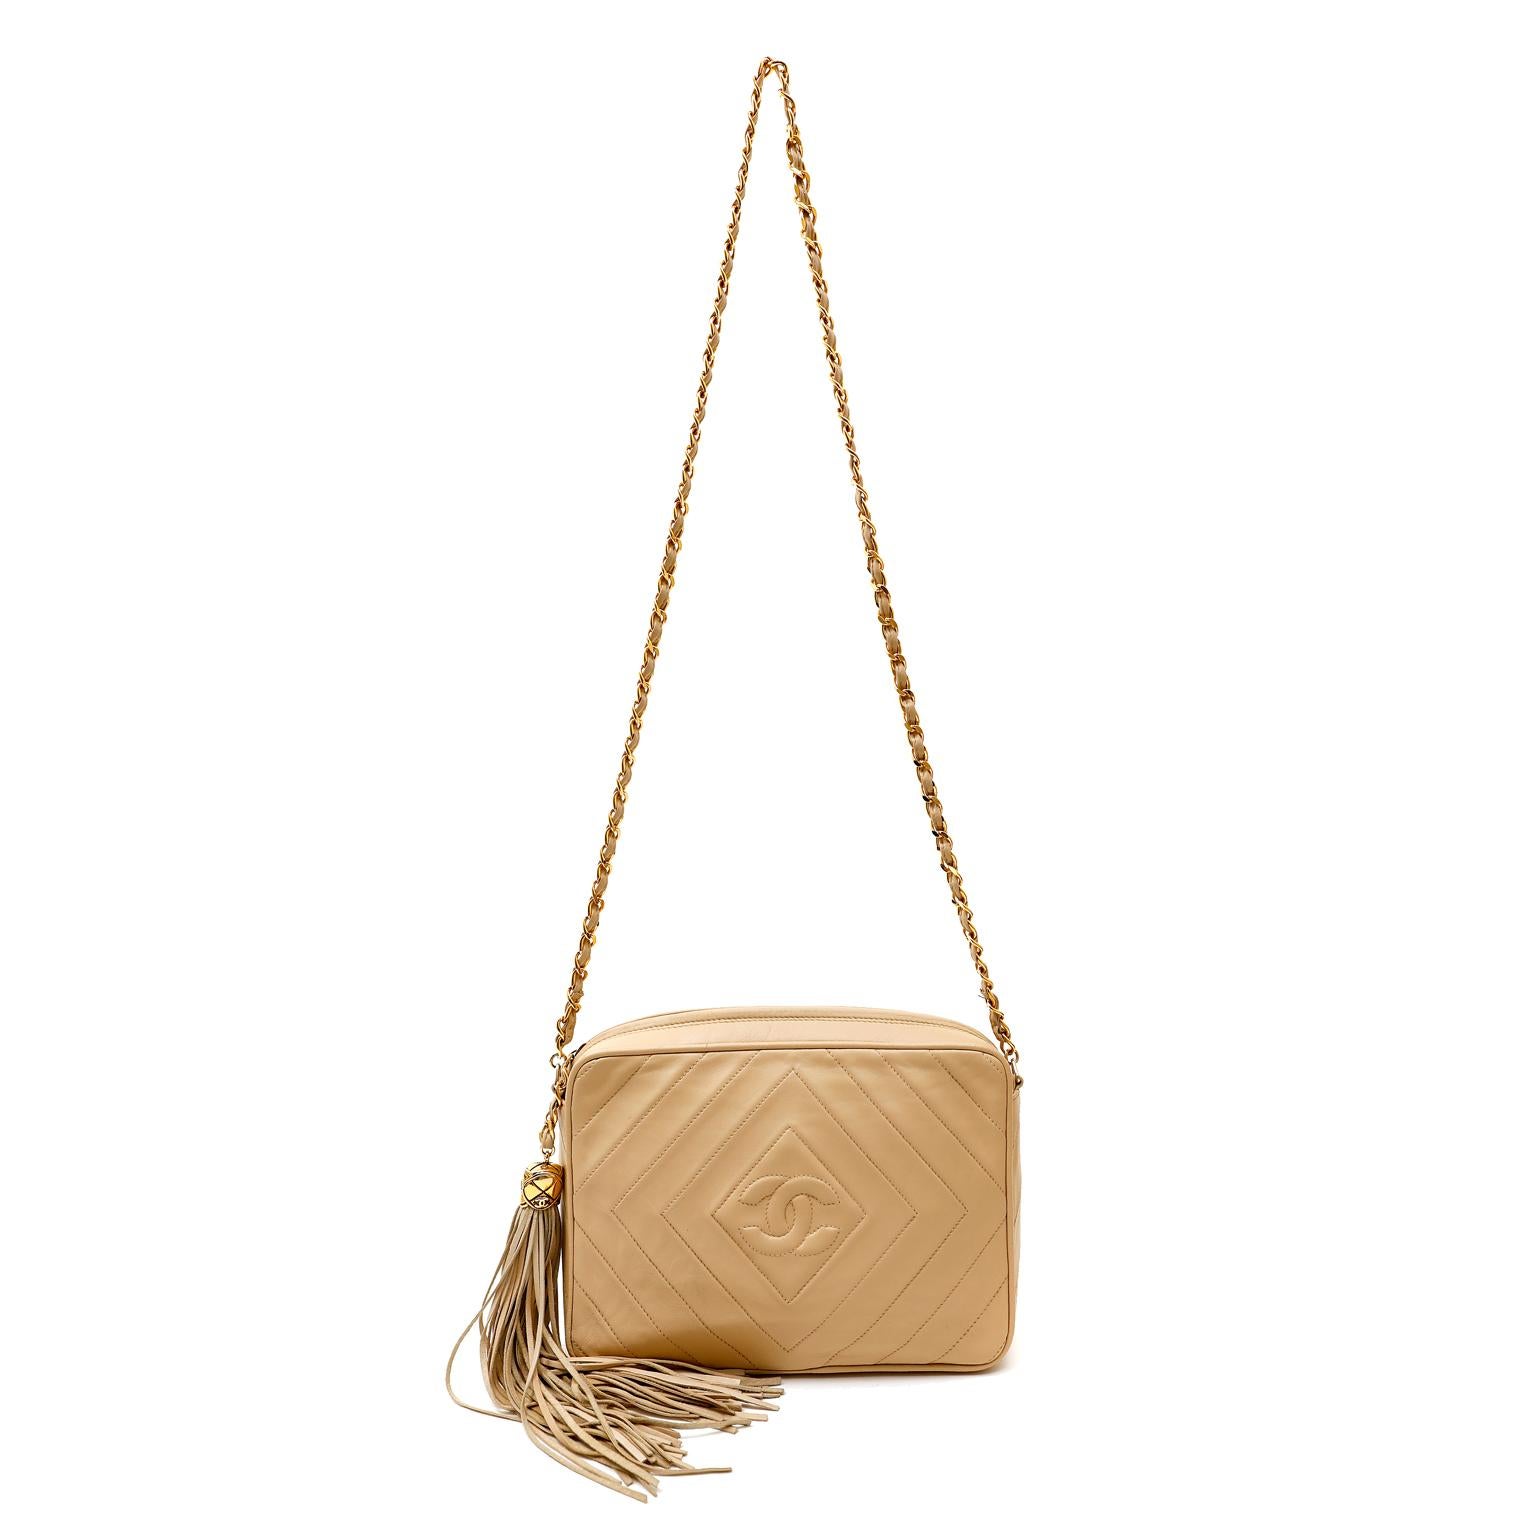 This authentic Chanel Beige Quilted Leather Camera Bag is in very good vintage condition. The classic silhouette has all the quintessential Chanel design elements that make it a true collectible.
Neutral beige leather is stitched with radiating